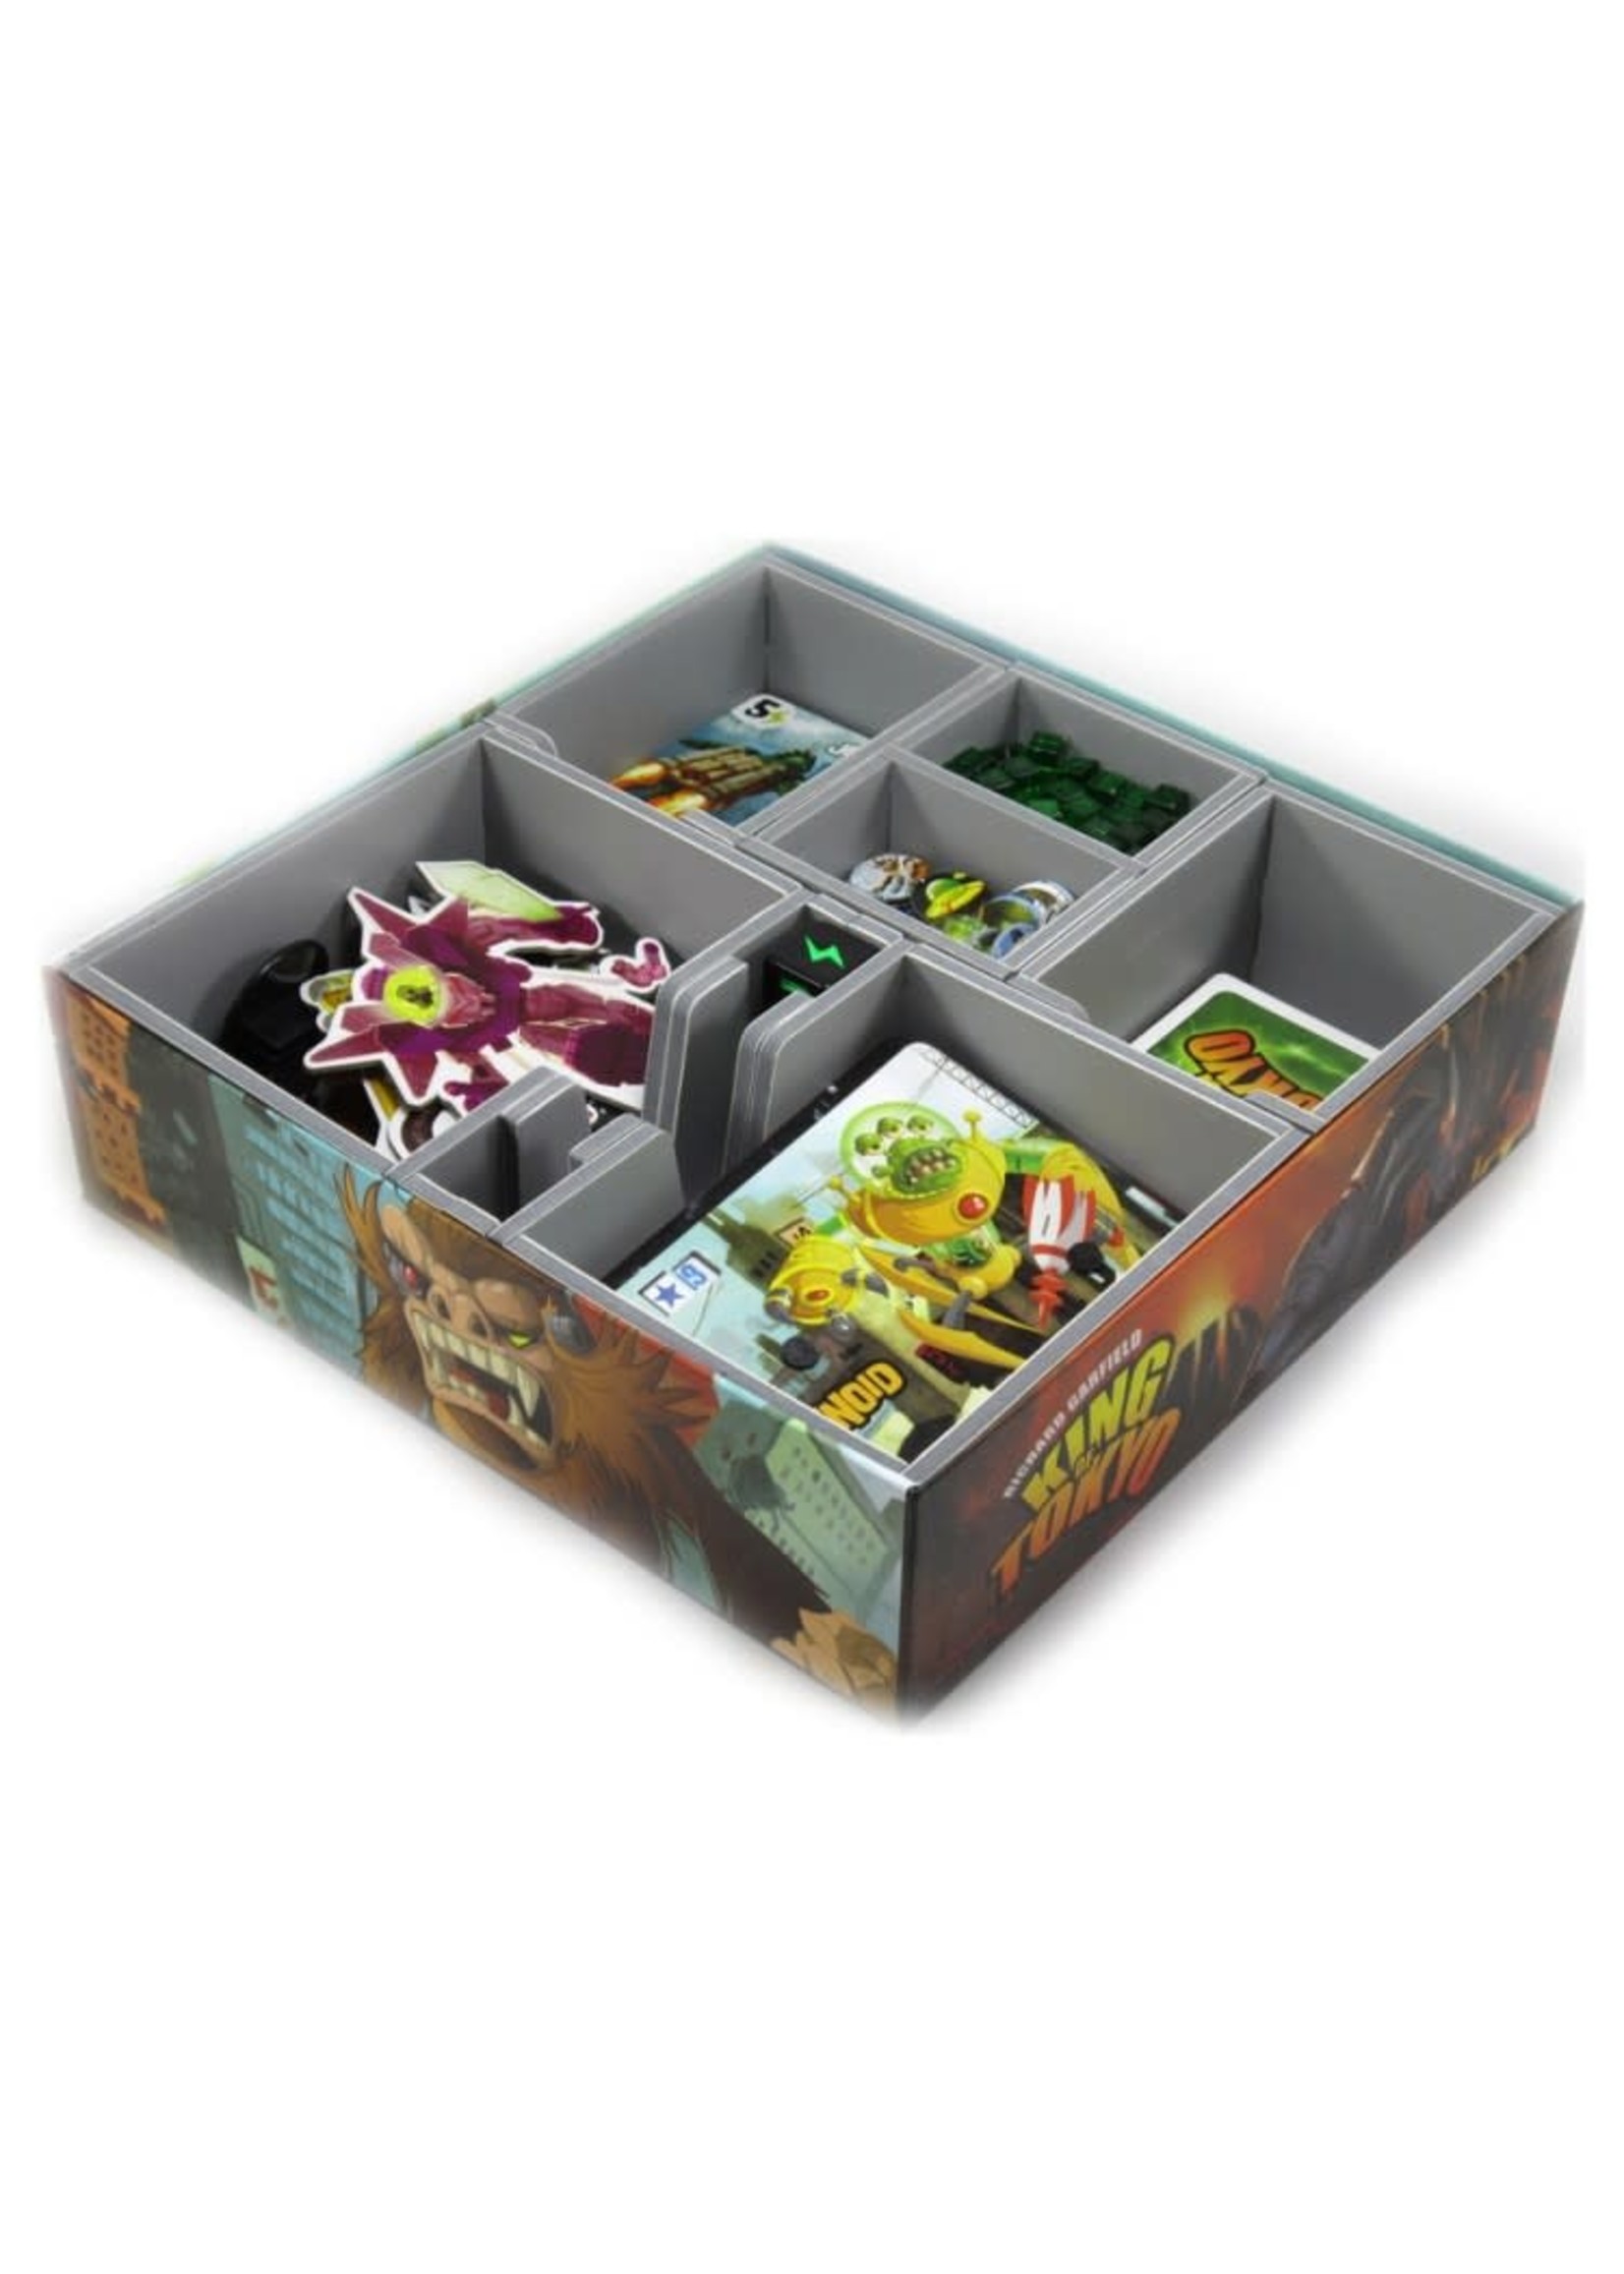 Folded Space Box Insert: King of Tokyo and Expansions